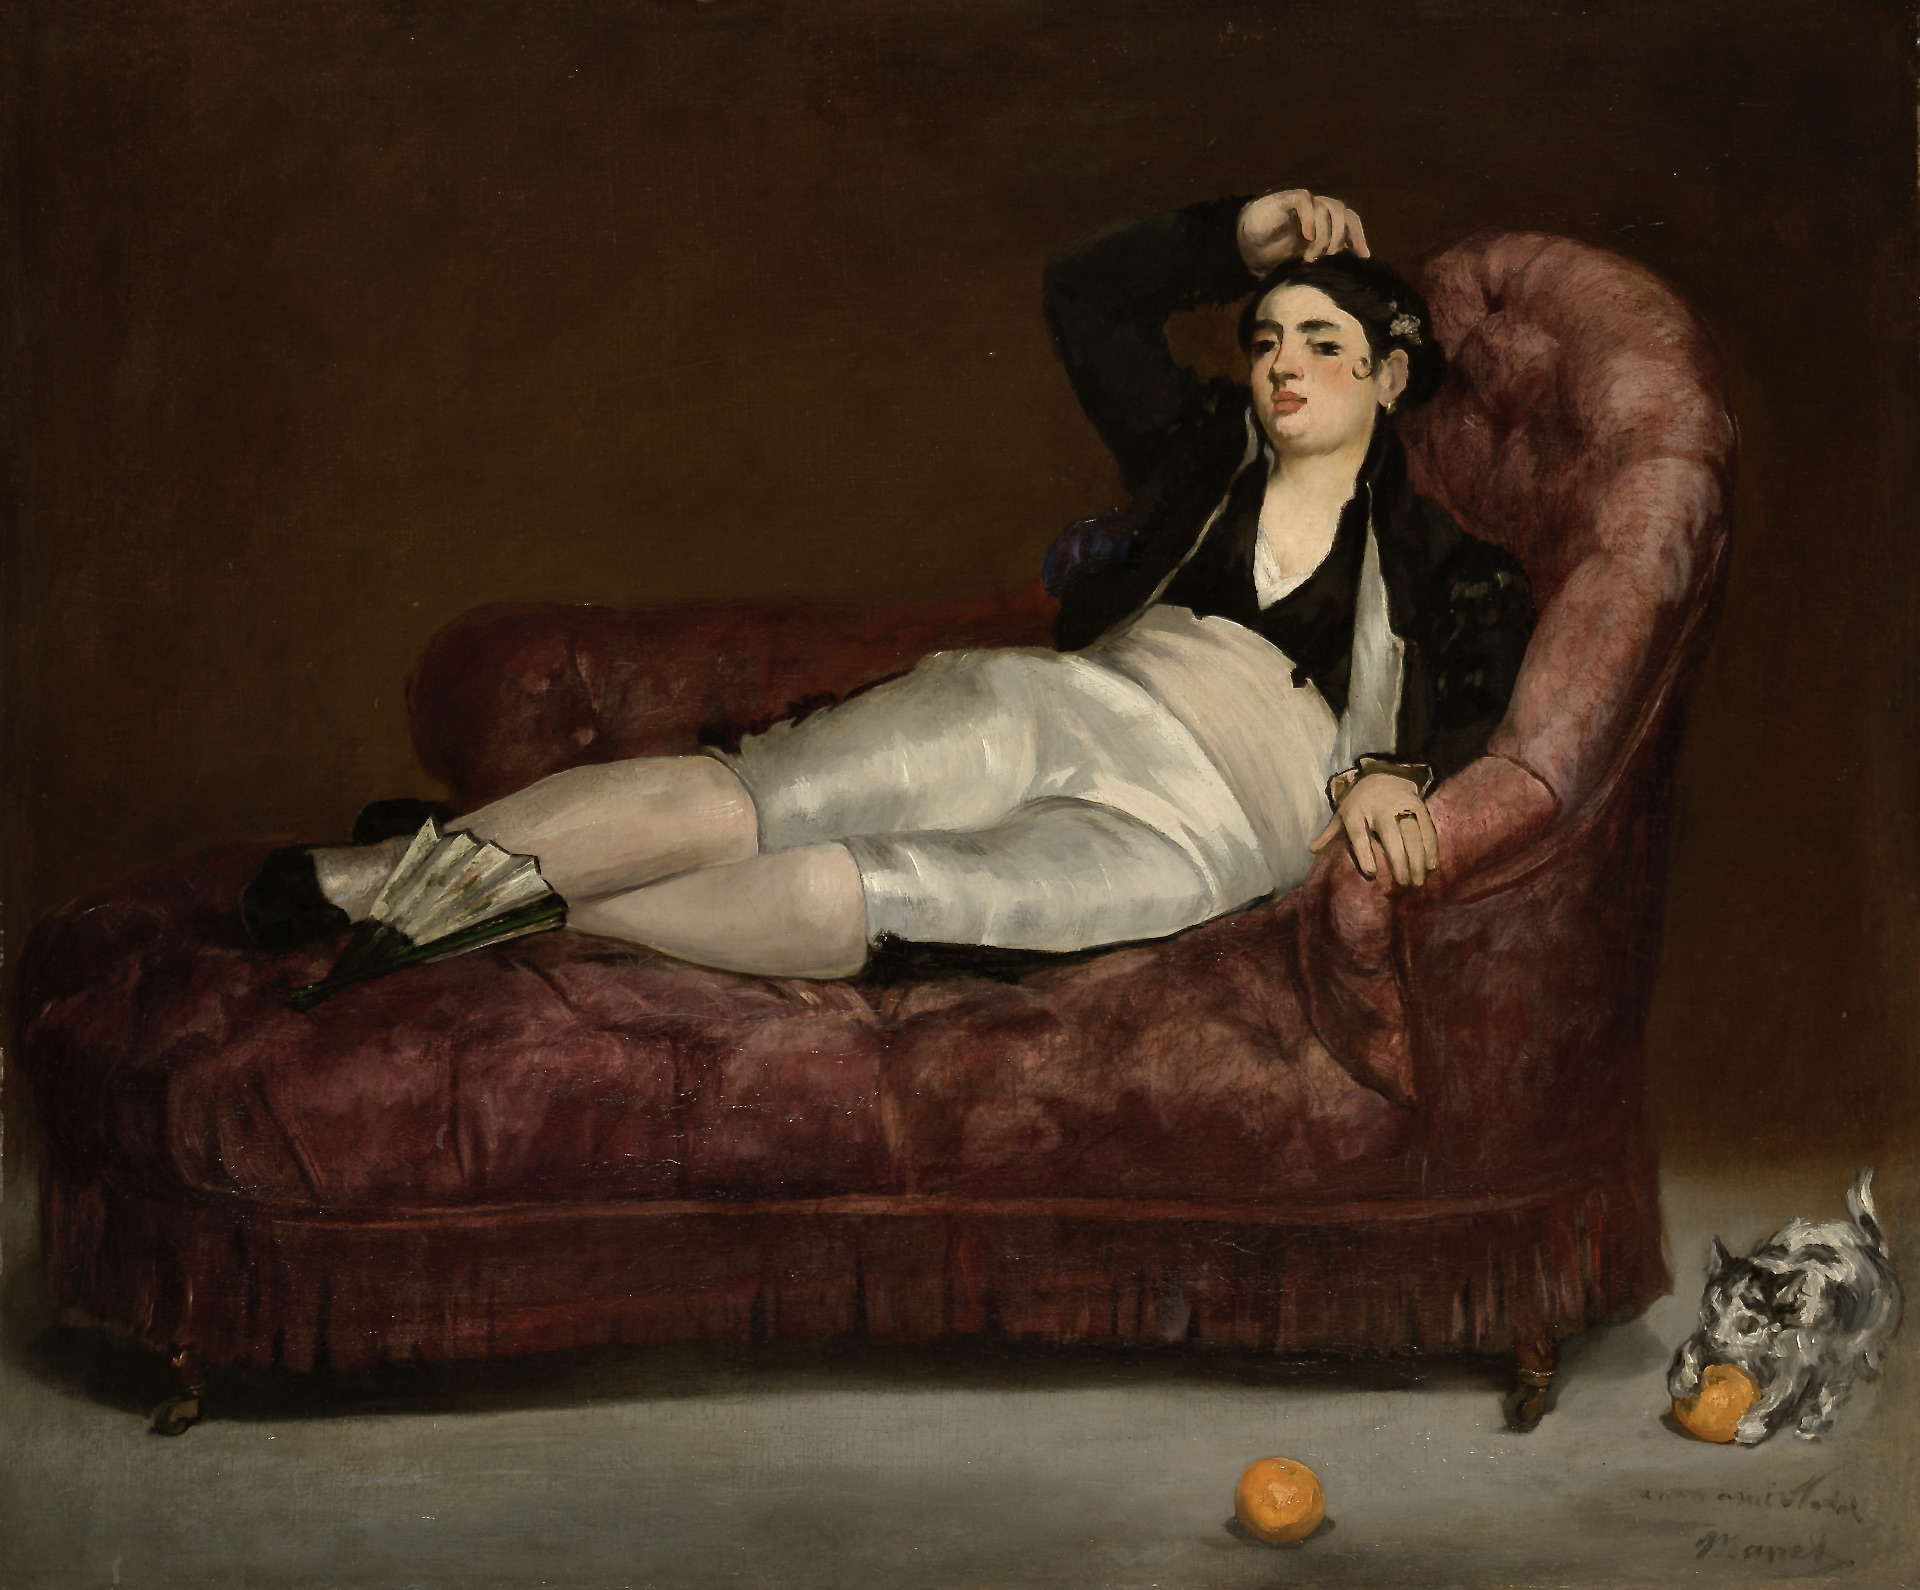 Édouard_Manet_-_Reclining_Young_Woman_in_Spanish_Costume_-_1961.18.33_-_Yale_University_Art_Gallery 2